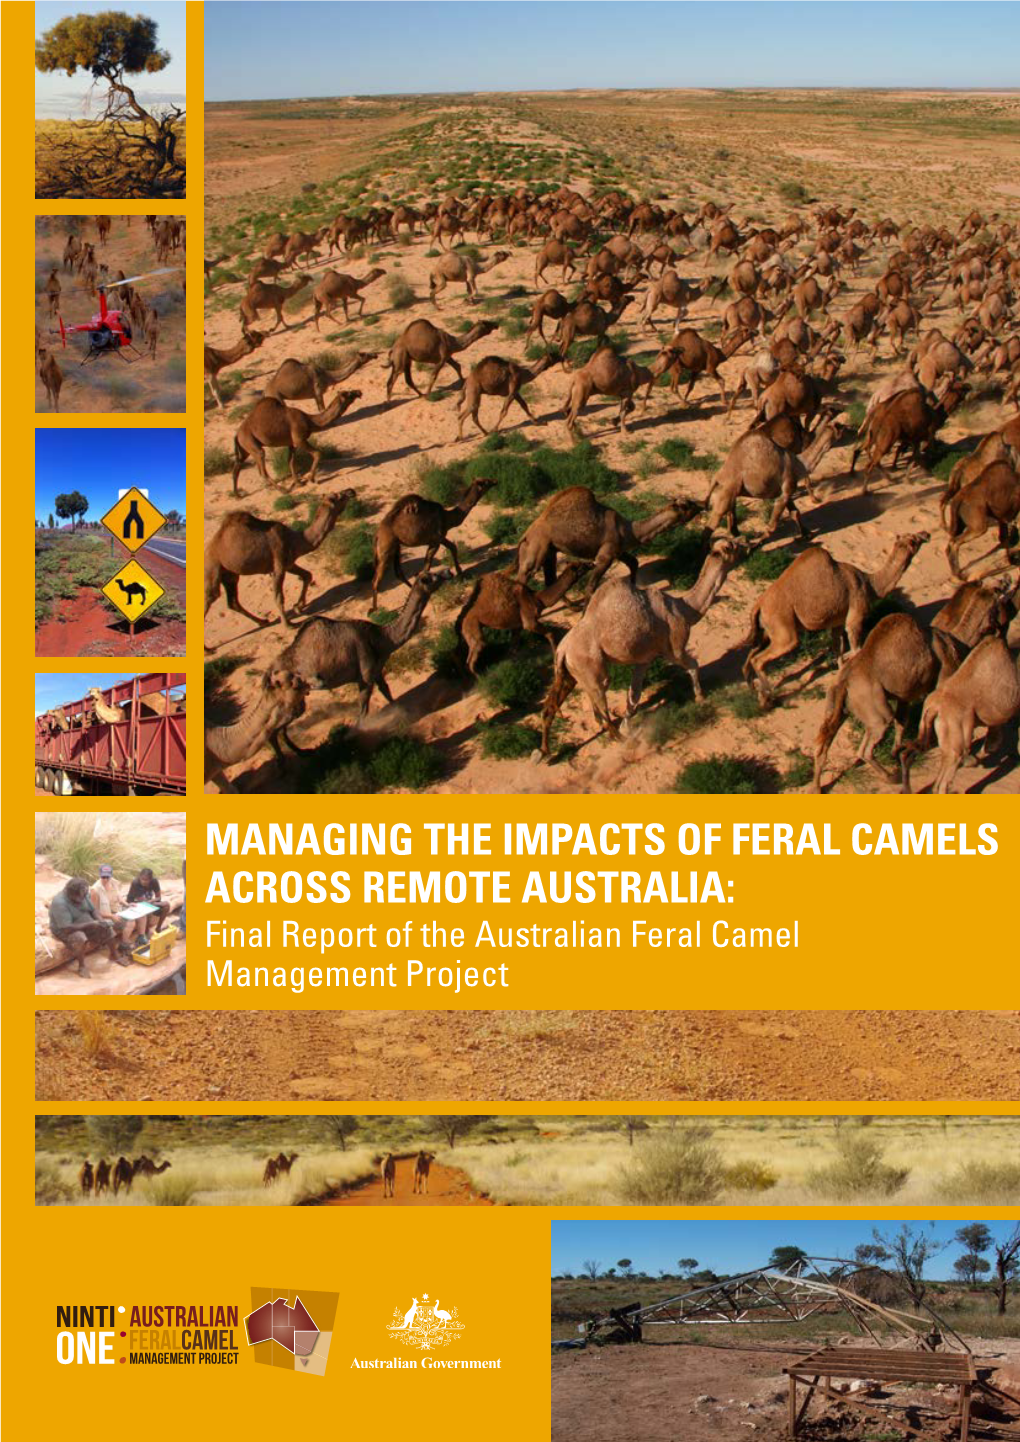 MANAGING the IMPACTS of FERAL CAMELS ACROSS REMOTE AUSTRALIA: Final Report of the Australian Feral Camel Management Project